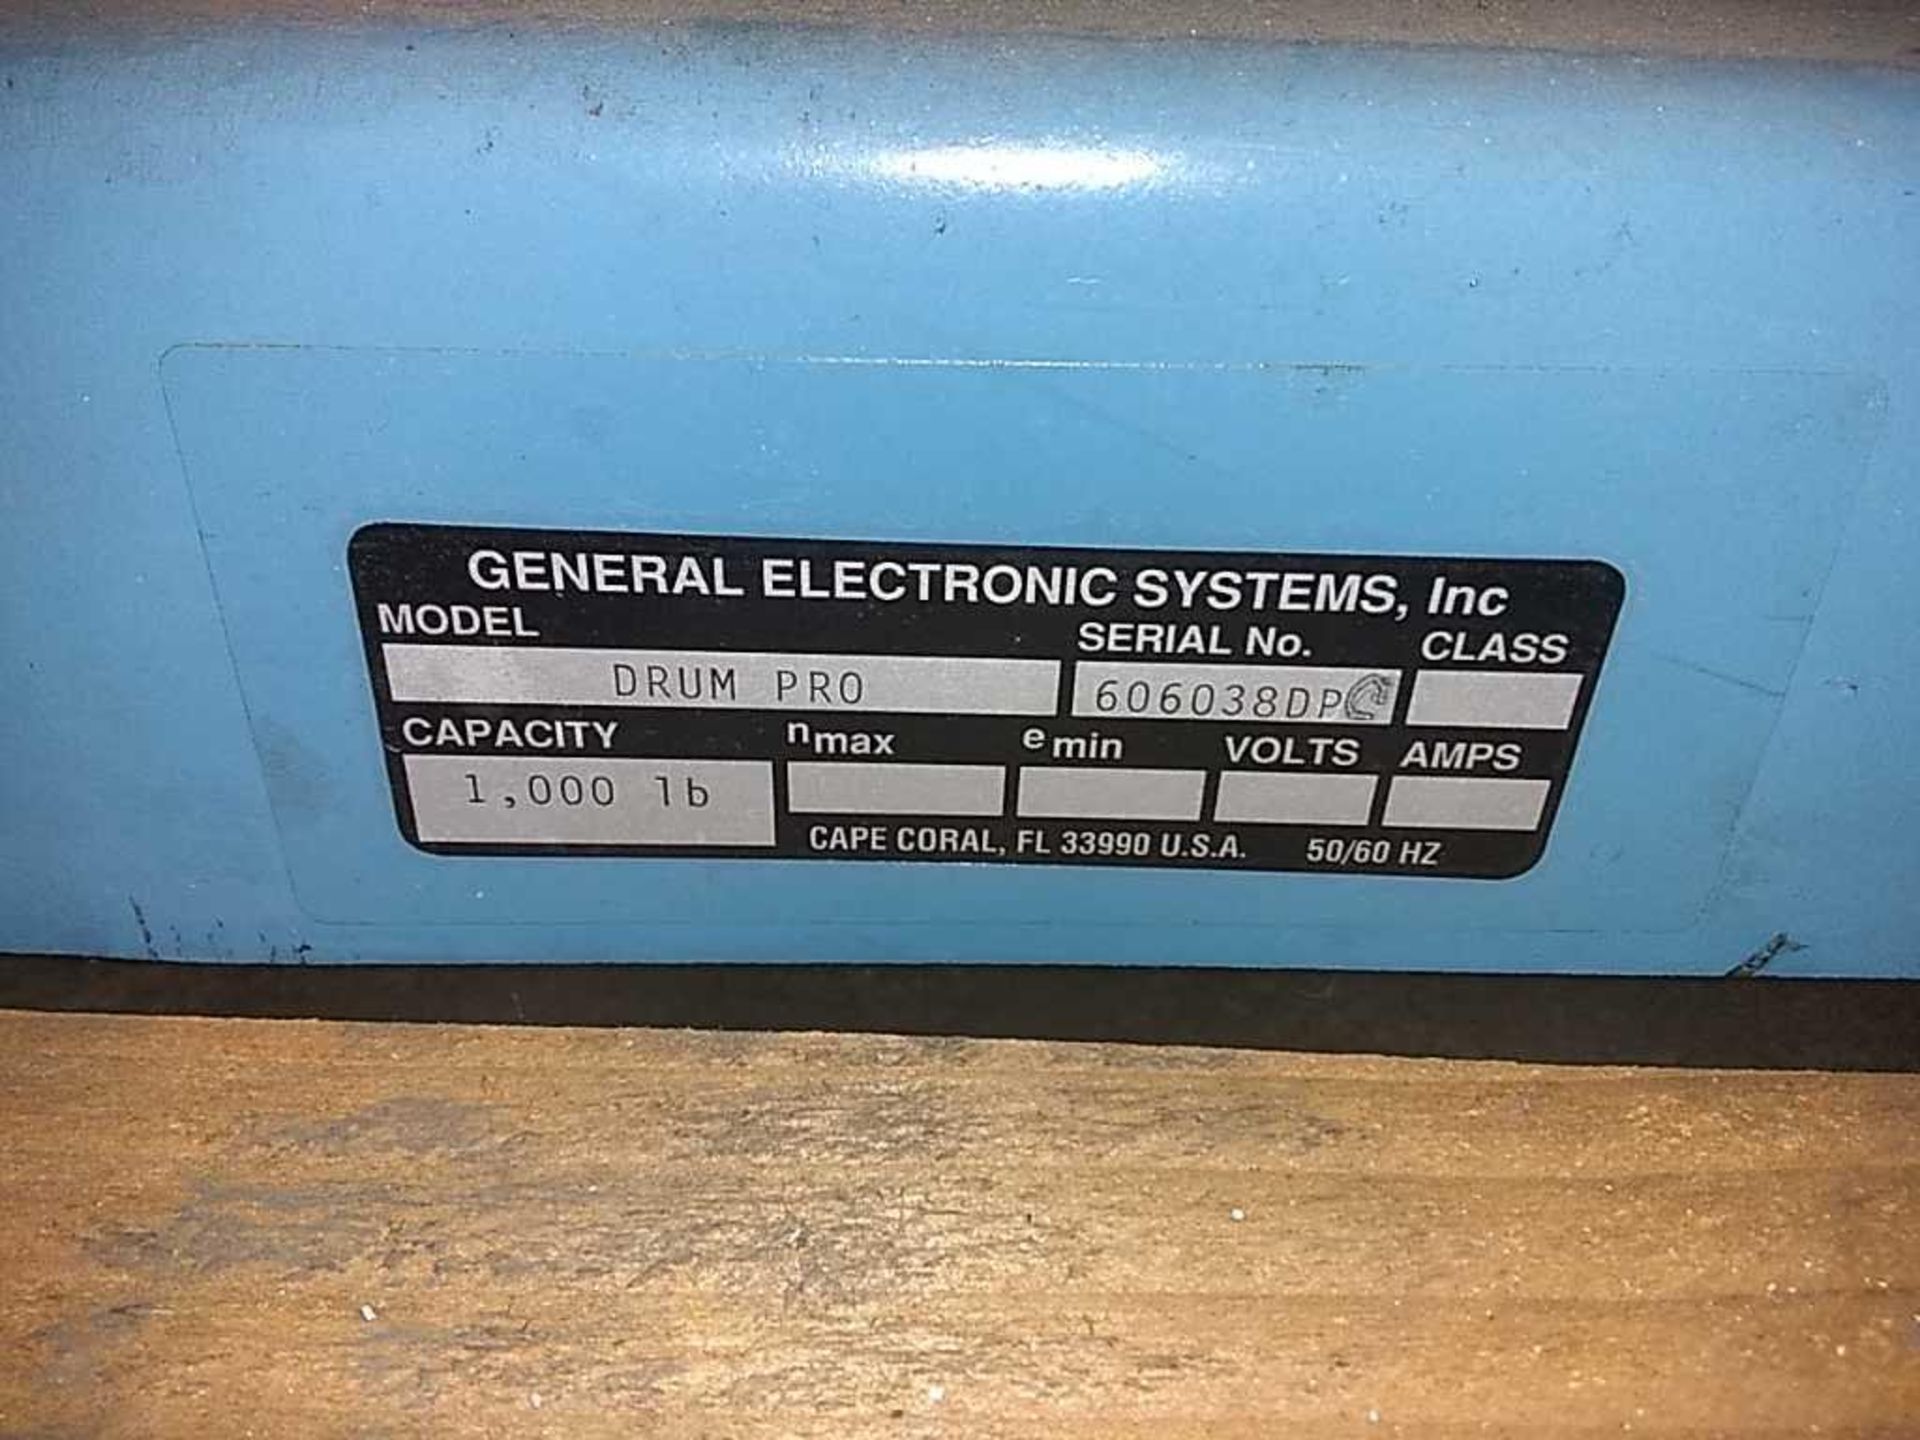 General Electronics Systems Drum Pro Model GE600SS 1000lb Capacity 30x30"" Digital Read Out - Image 4 of 4